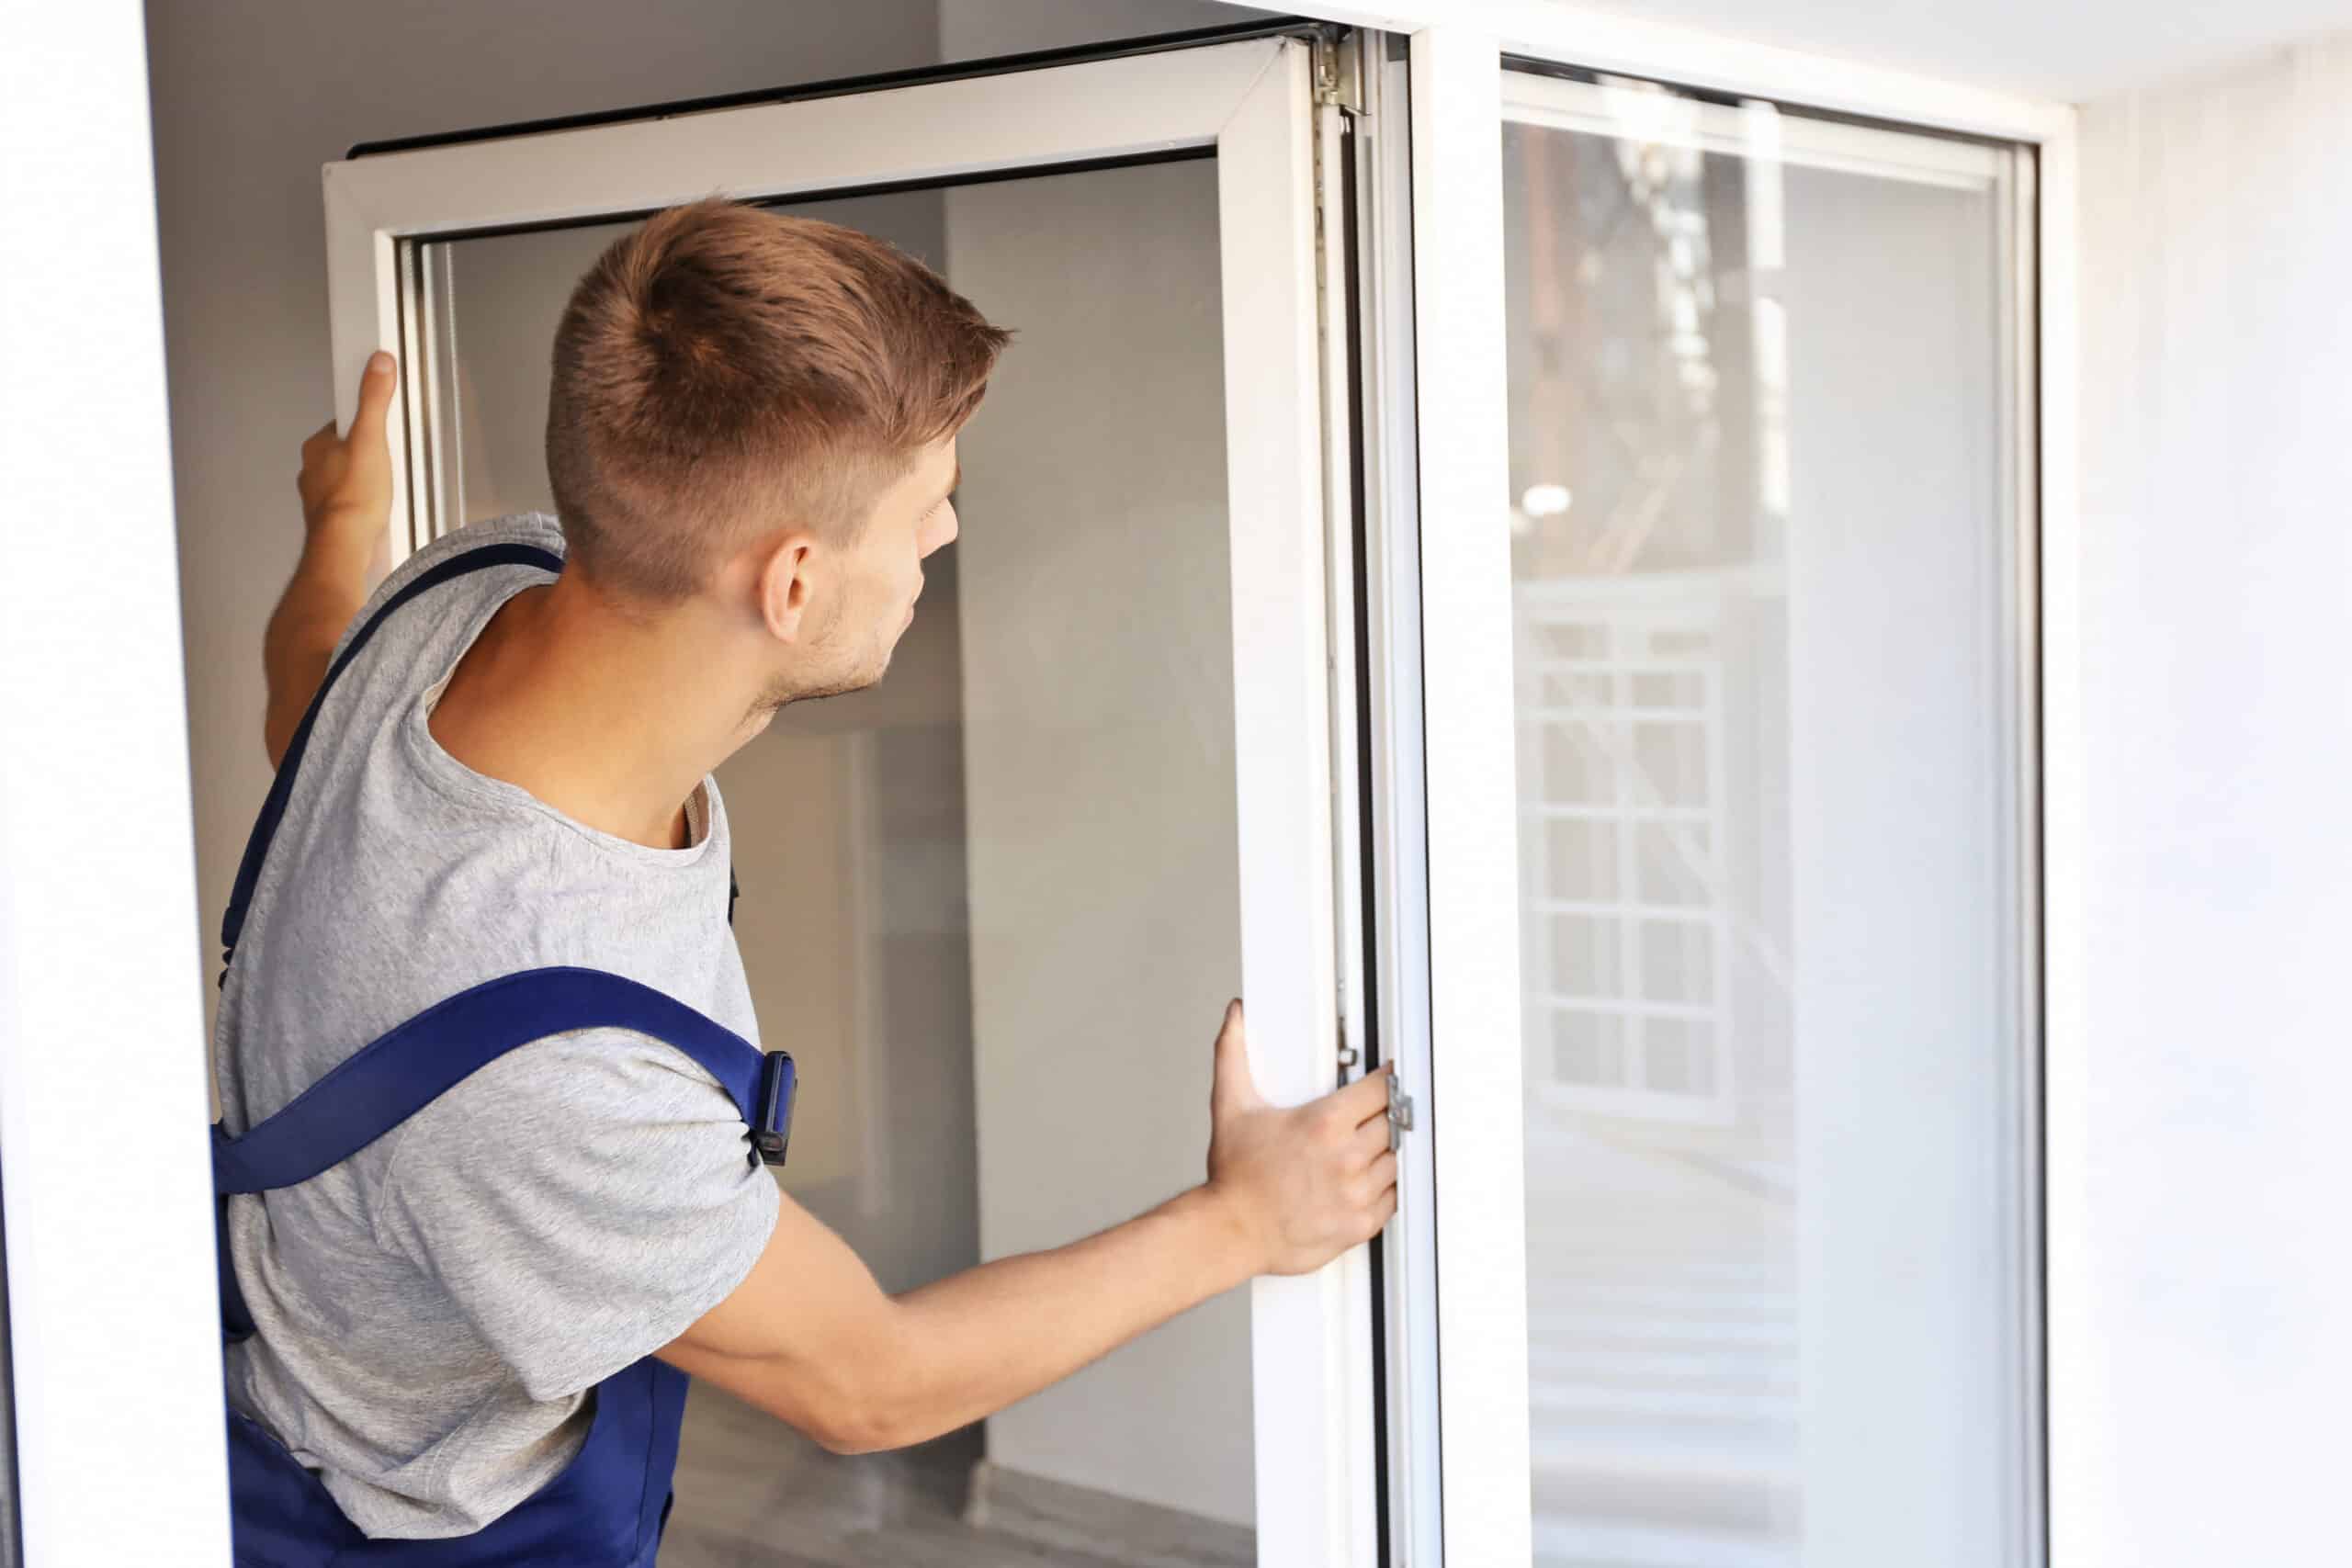 A worker in a gray shirt and overalls installs a sliding glass door in a bright, contemporary room.